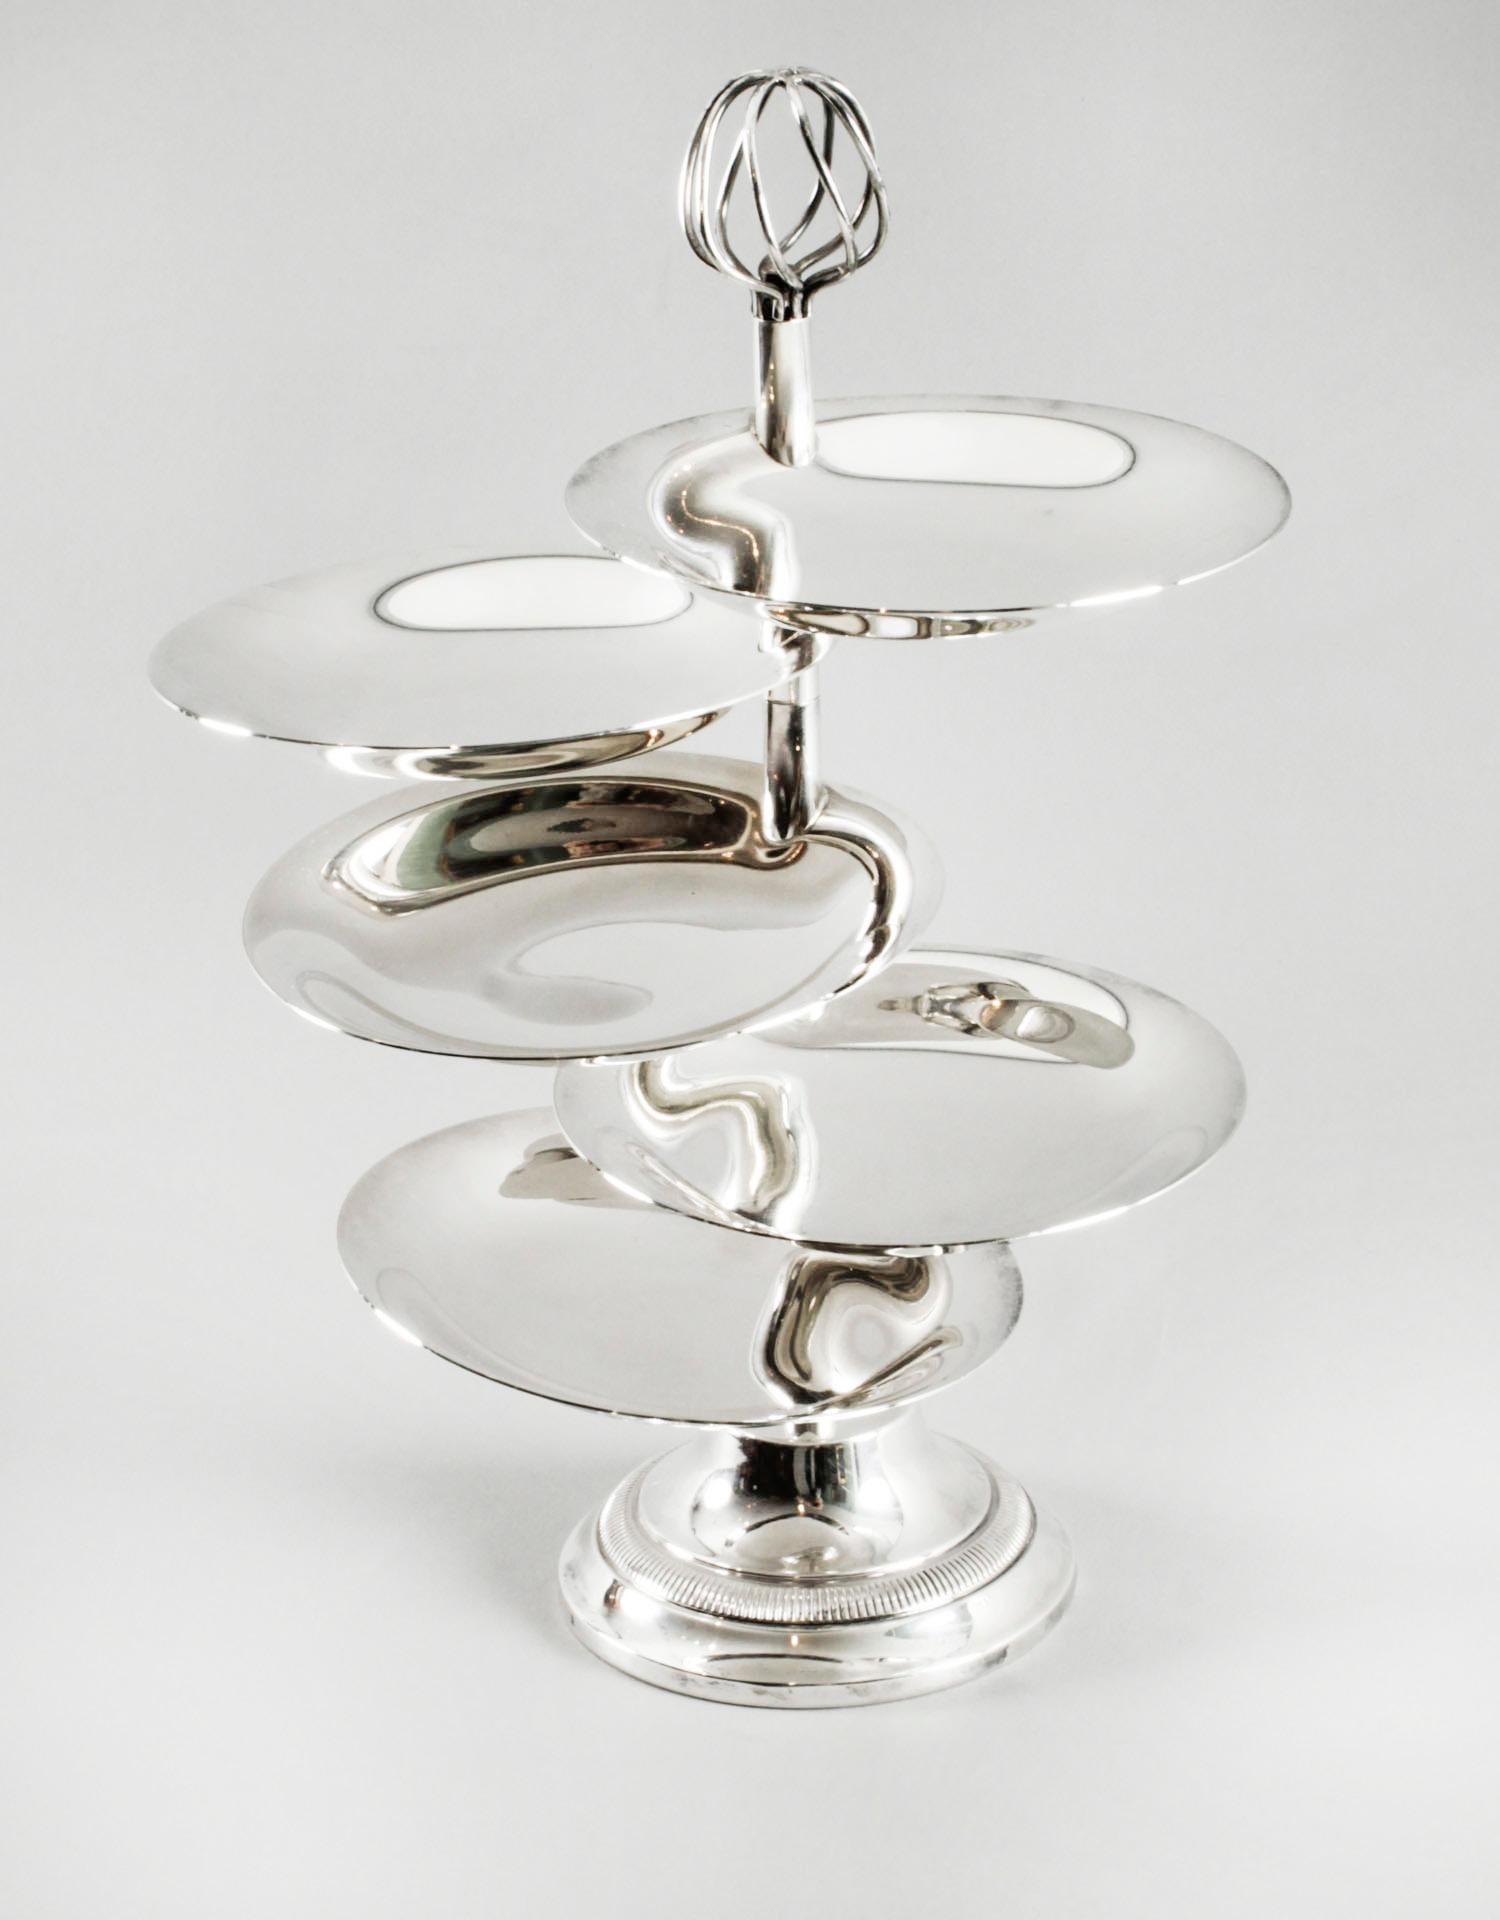 Antique Silver Plated Hors d'oeuvres Stand by Christofle 19th C For Sale 8